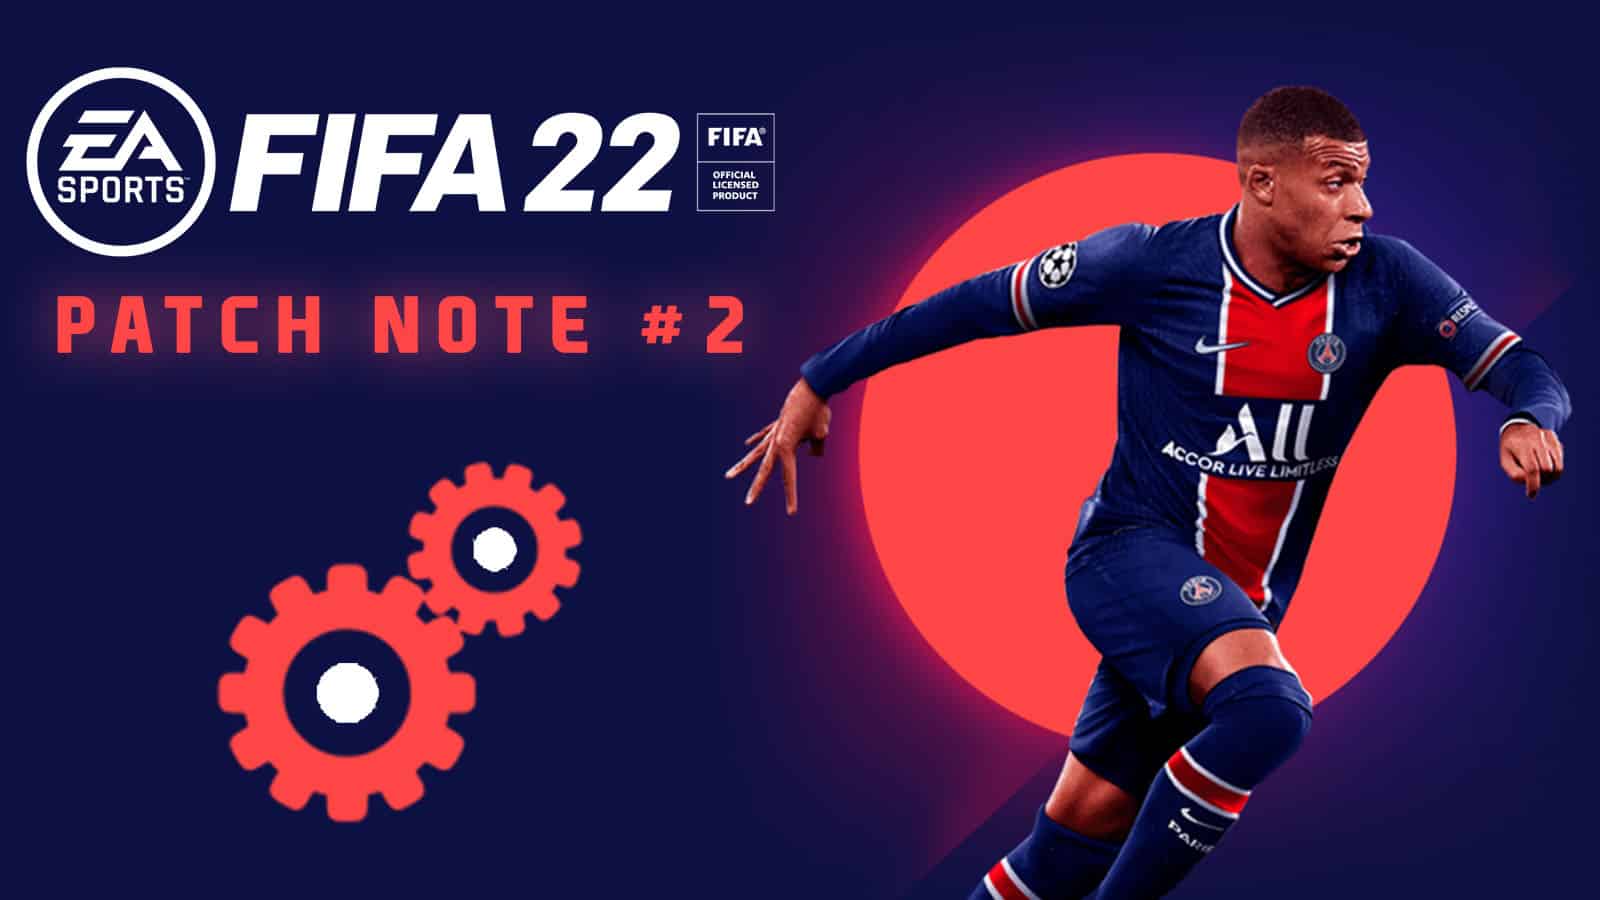 FIFA 22 patch note 2